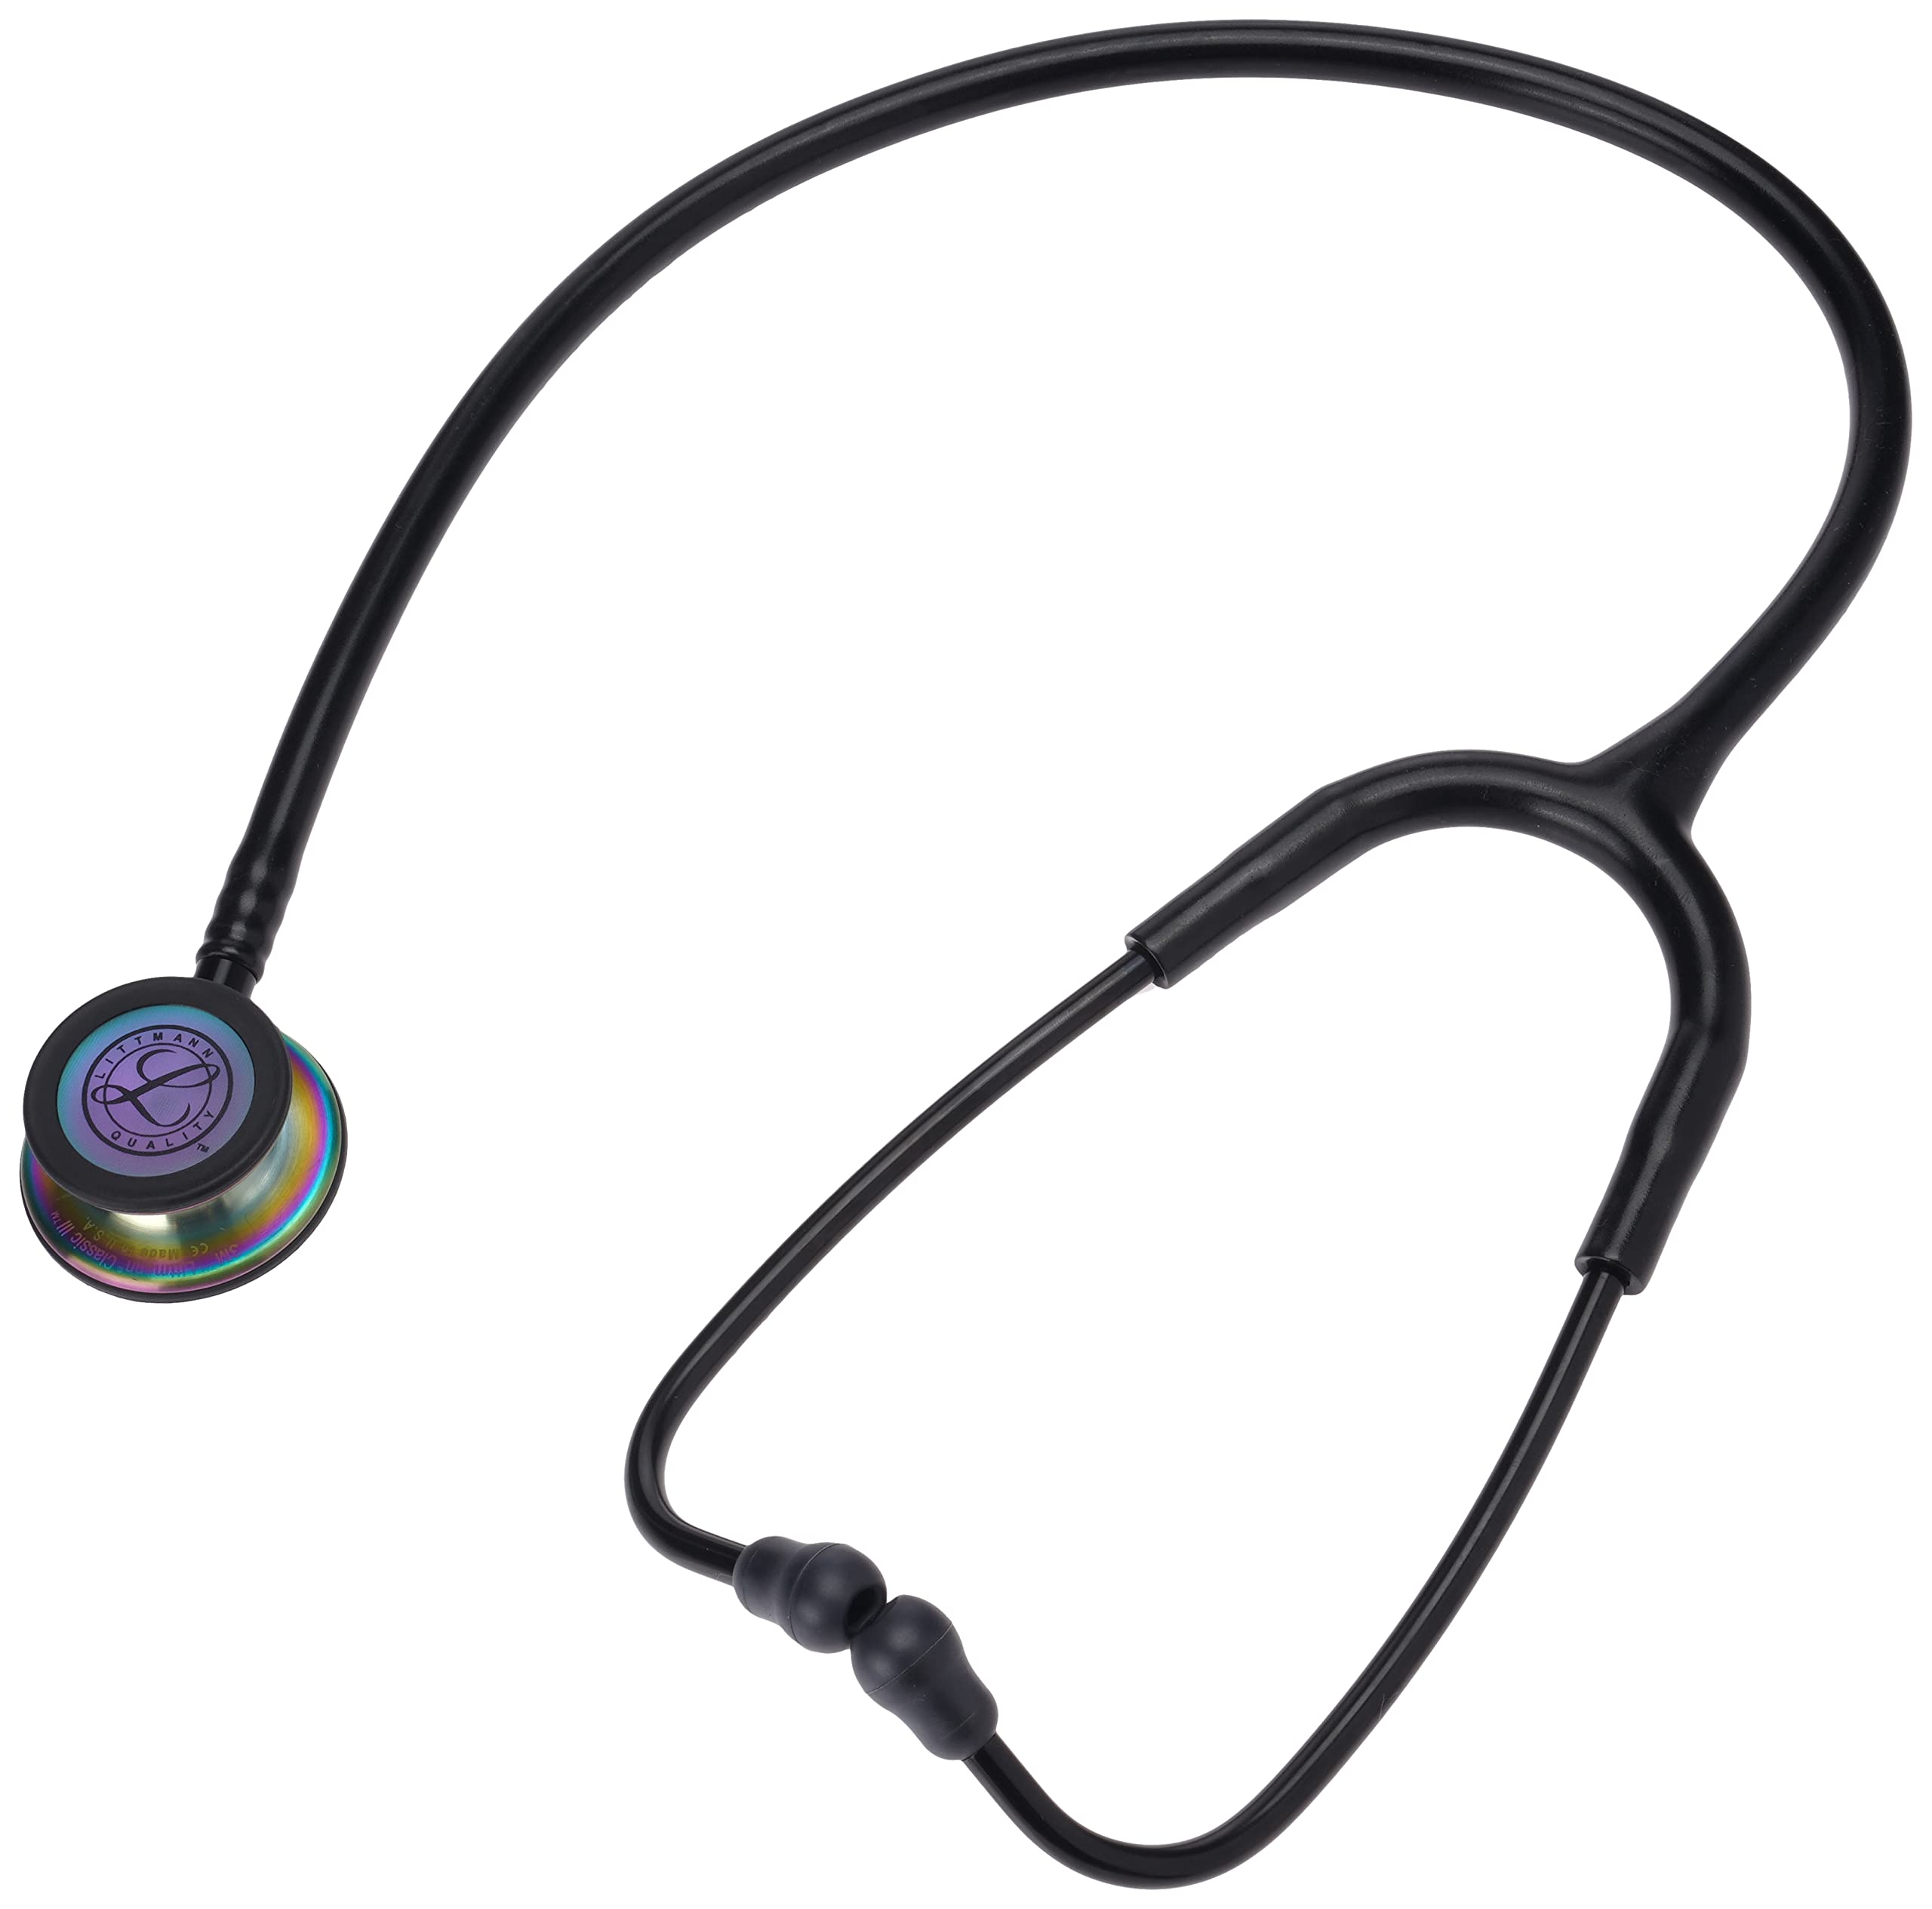 3M Littmann Classic III Stethoscope Special Black with Black and Rainbow Finish (5870) - 3M Littmann Classic III Special Edition Supplier in Pakistan - 3M Littmann Classic III 5870 Black with Rainbow Stethoscopes in Pakistan